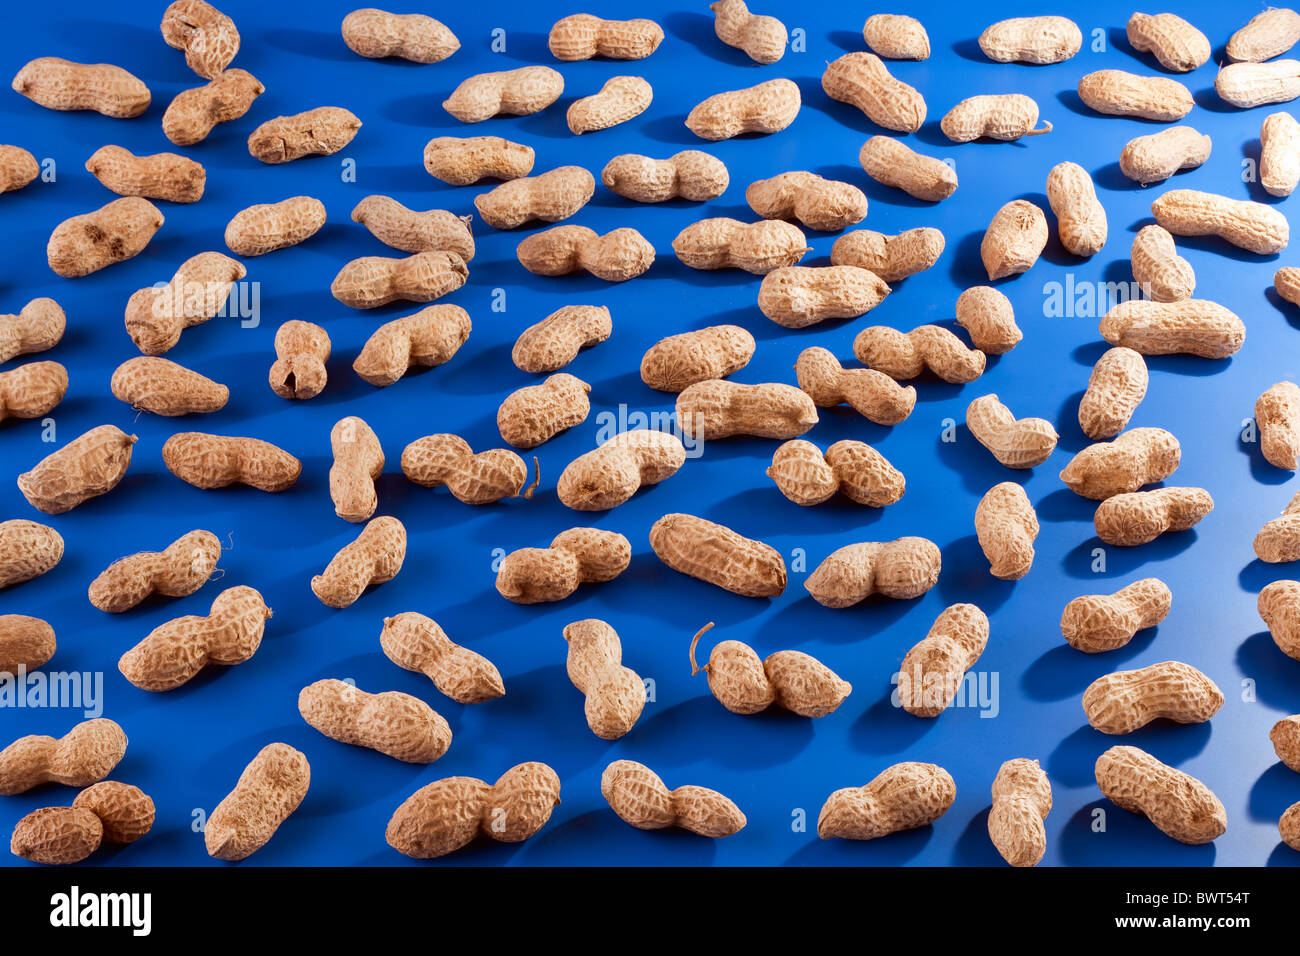 Scattered roasted peanuts Stock Photo